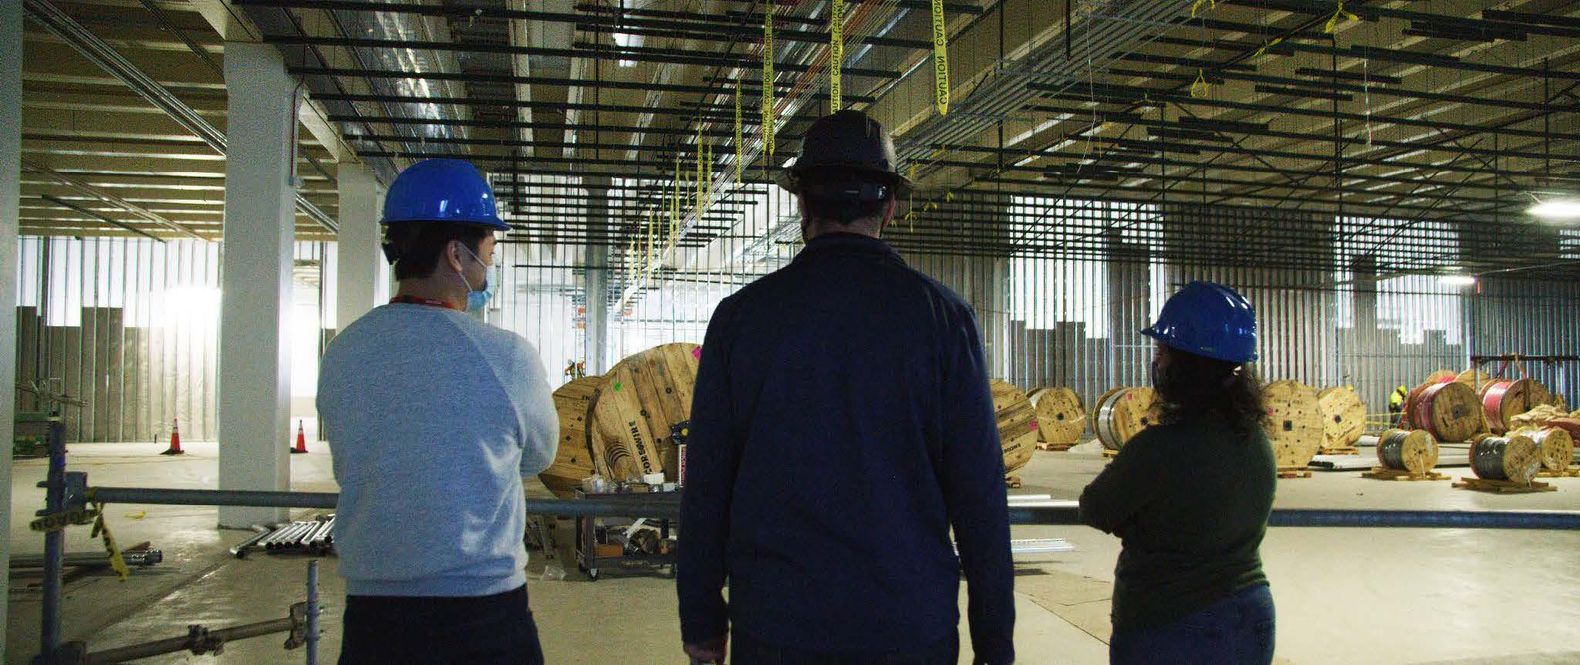 Three people wearing construction helmets in the foreground look out to an empty warehouse-sized room where giant spools of something sit.